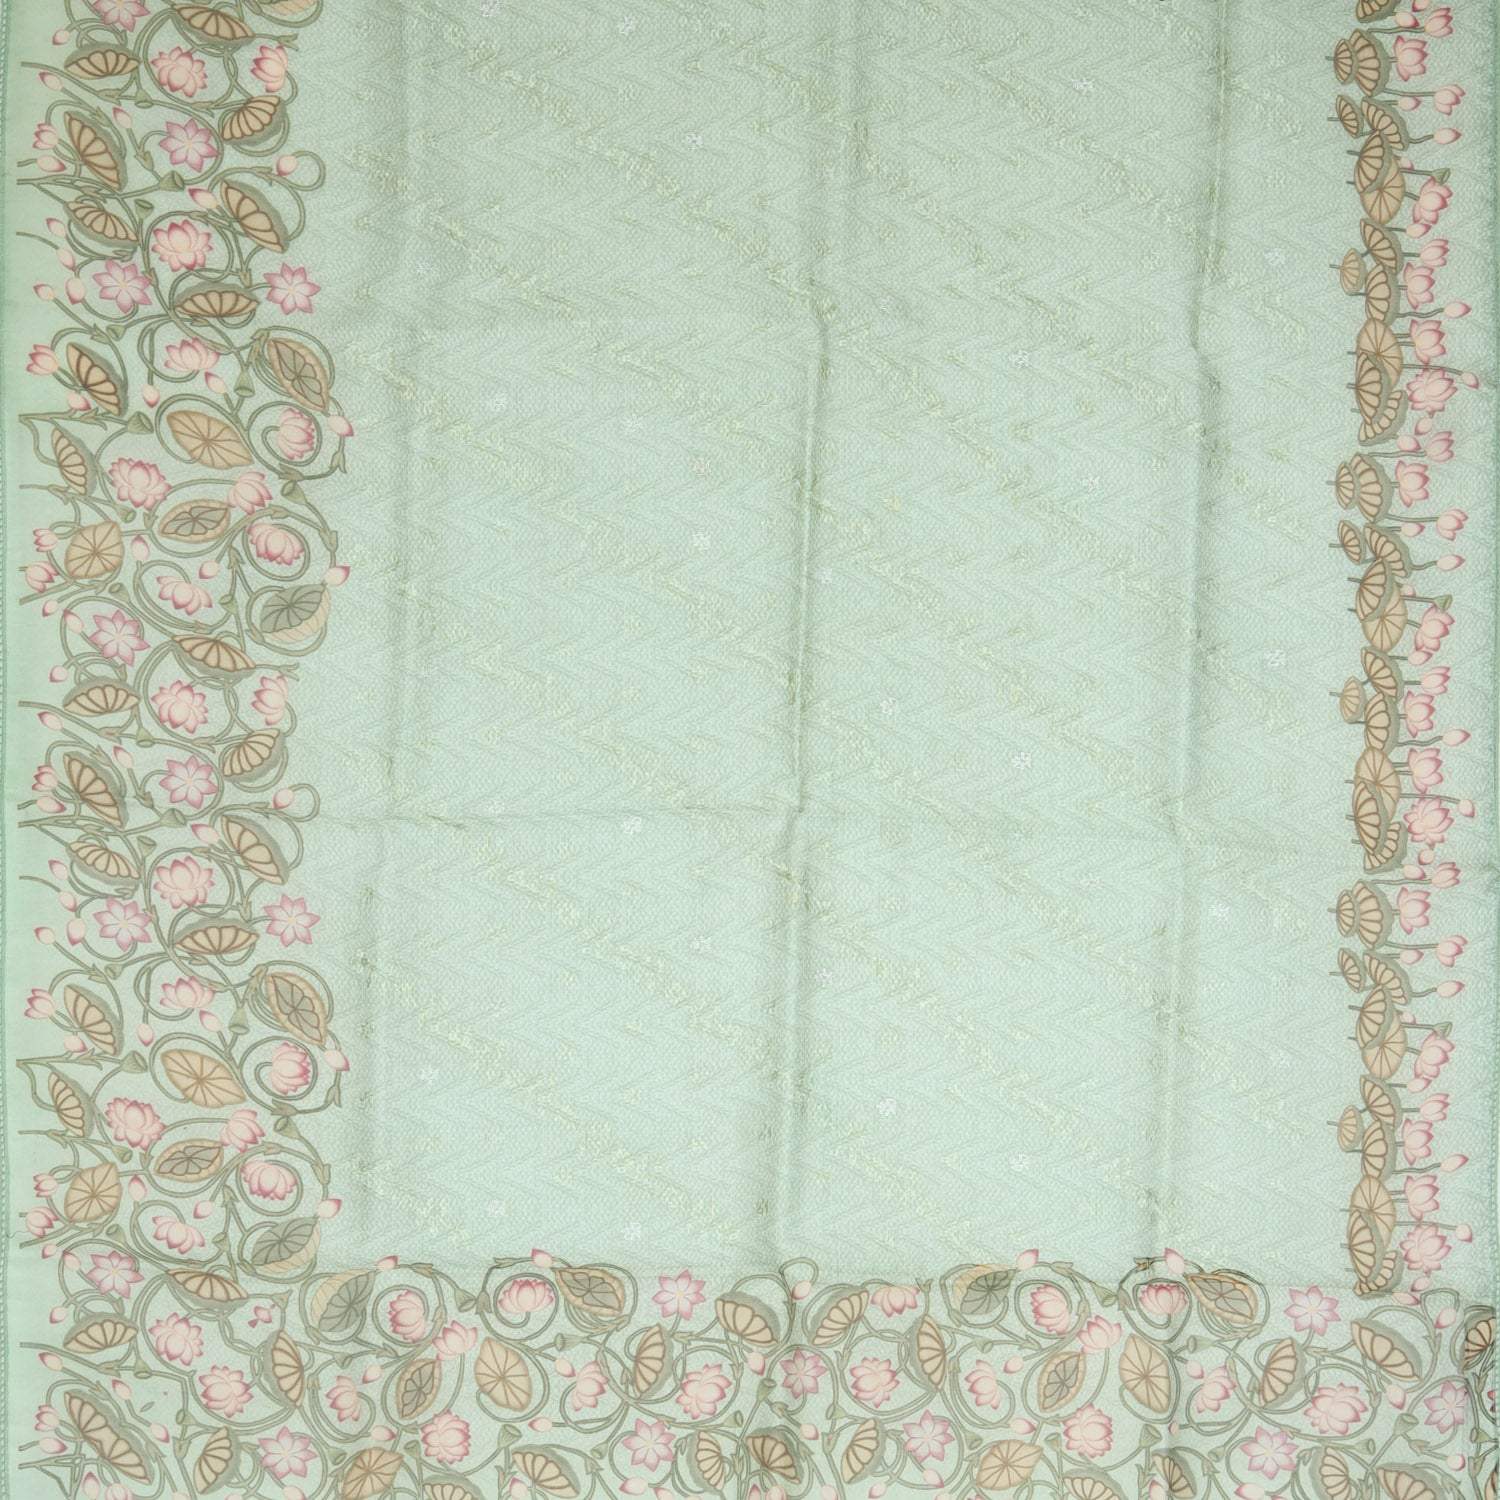 Light Sage Green Pichwai Printed Organza Saree With Floral Embroidery - Singhania's